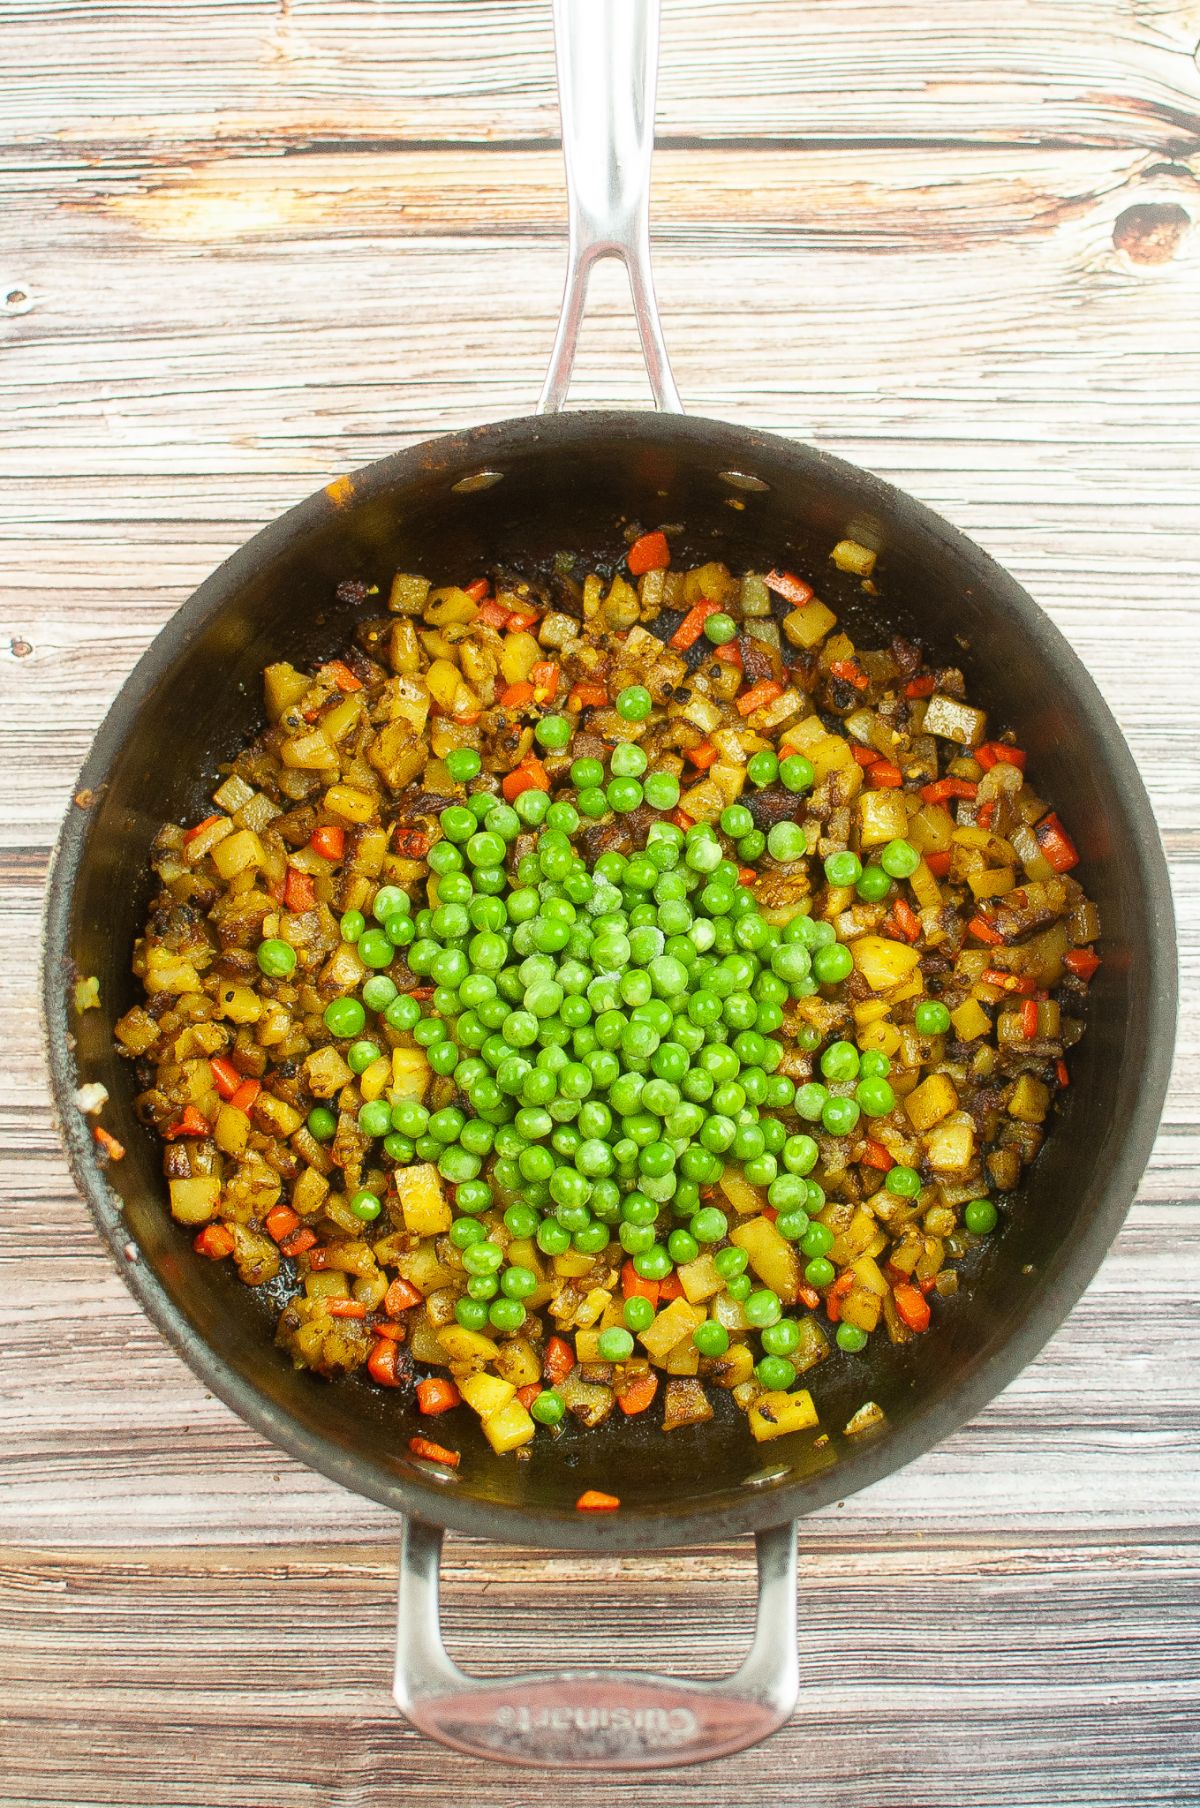 The peas and seasonings are added to the large skillet.